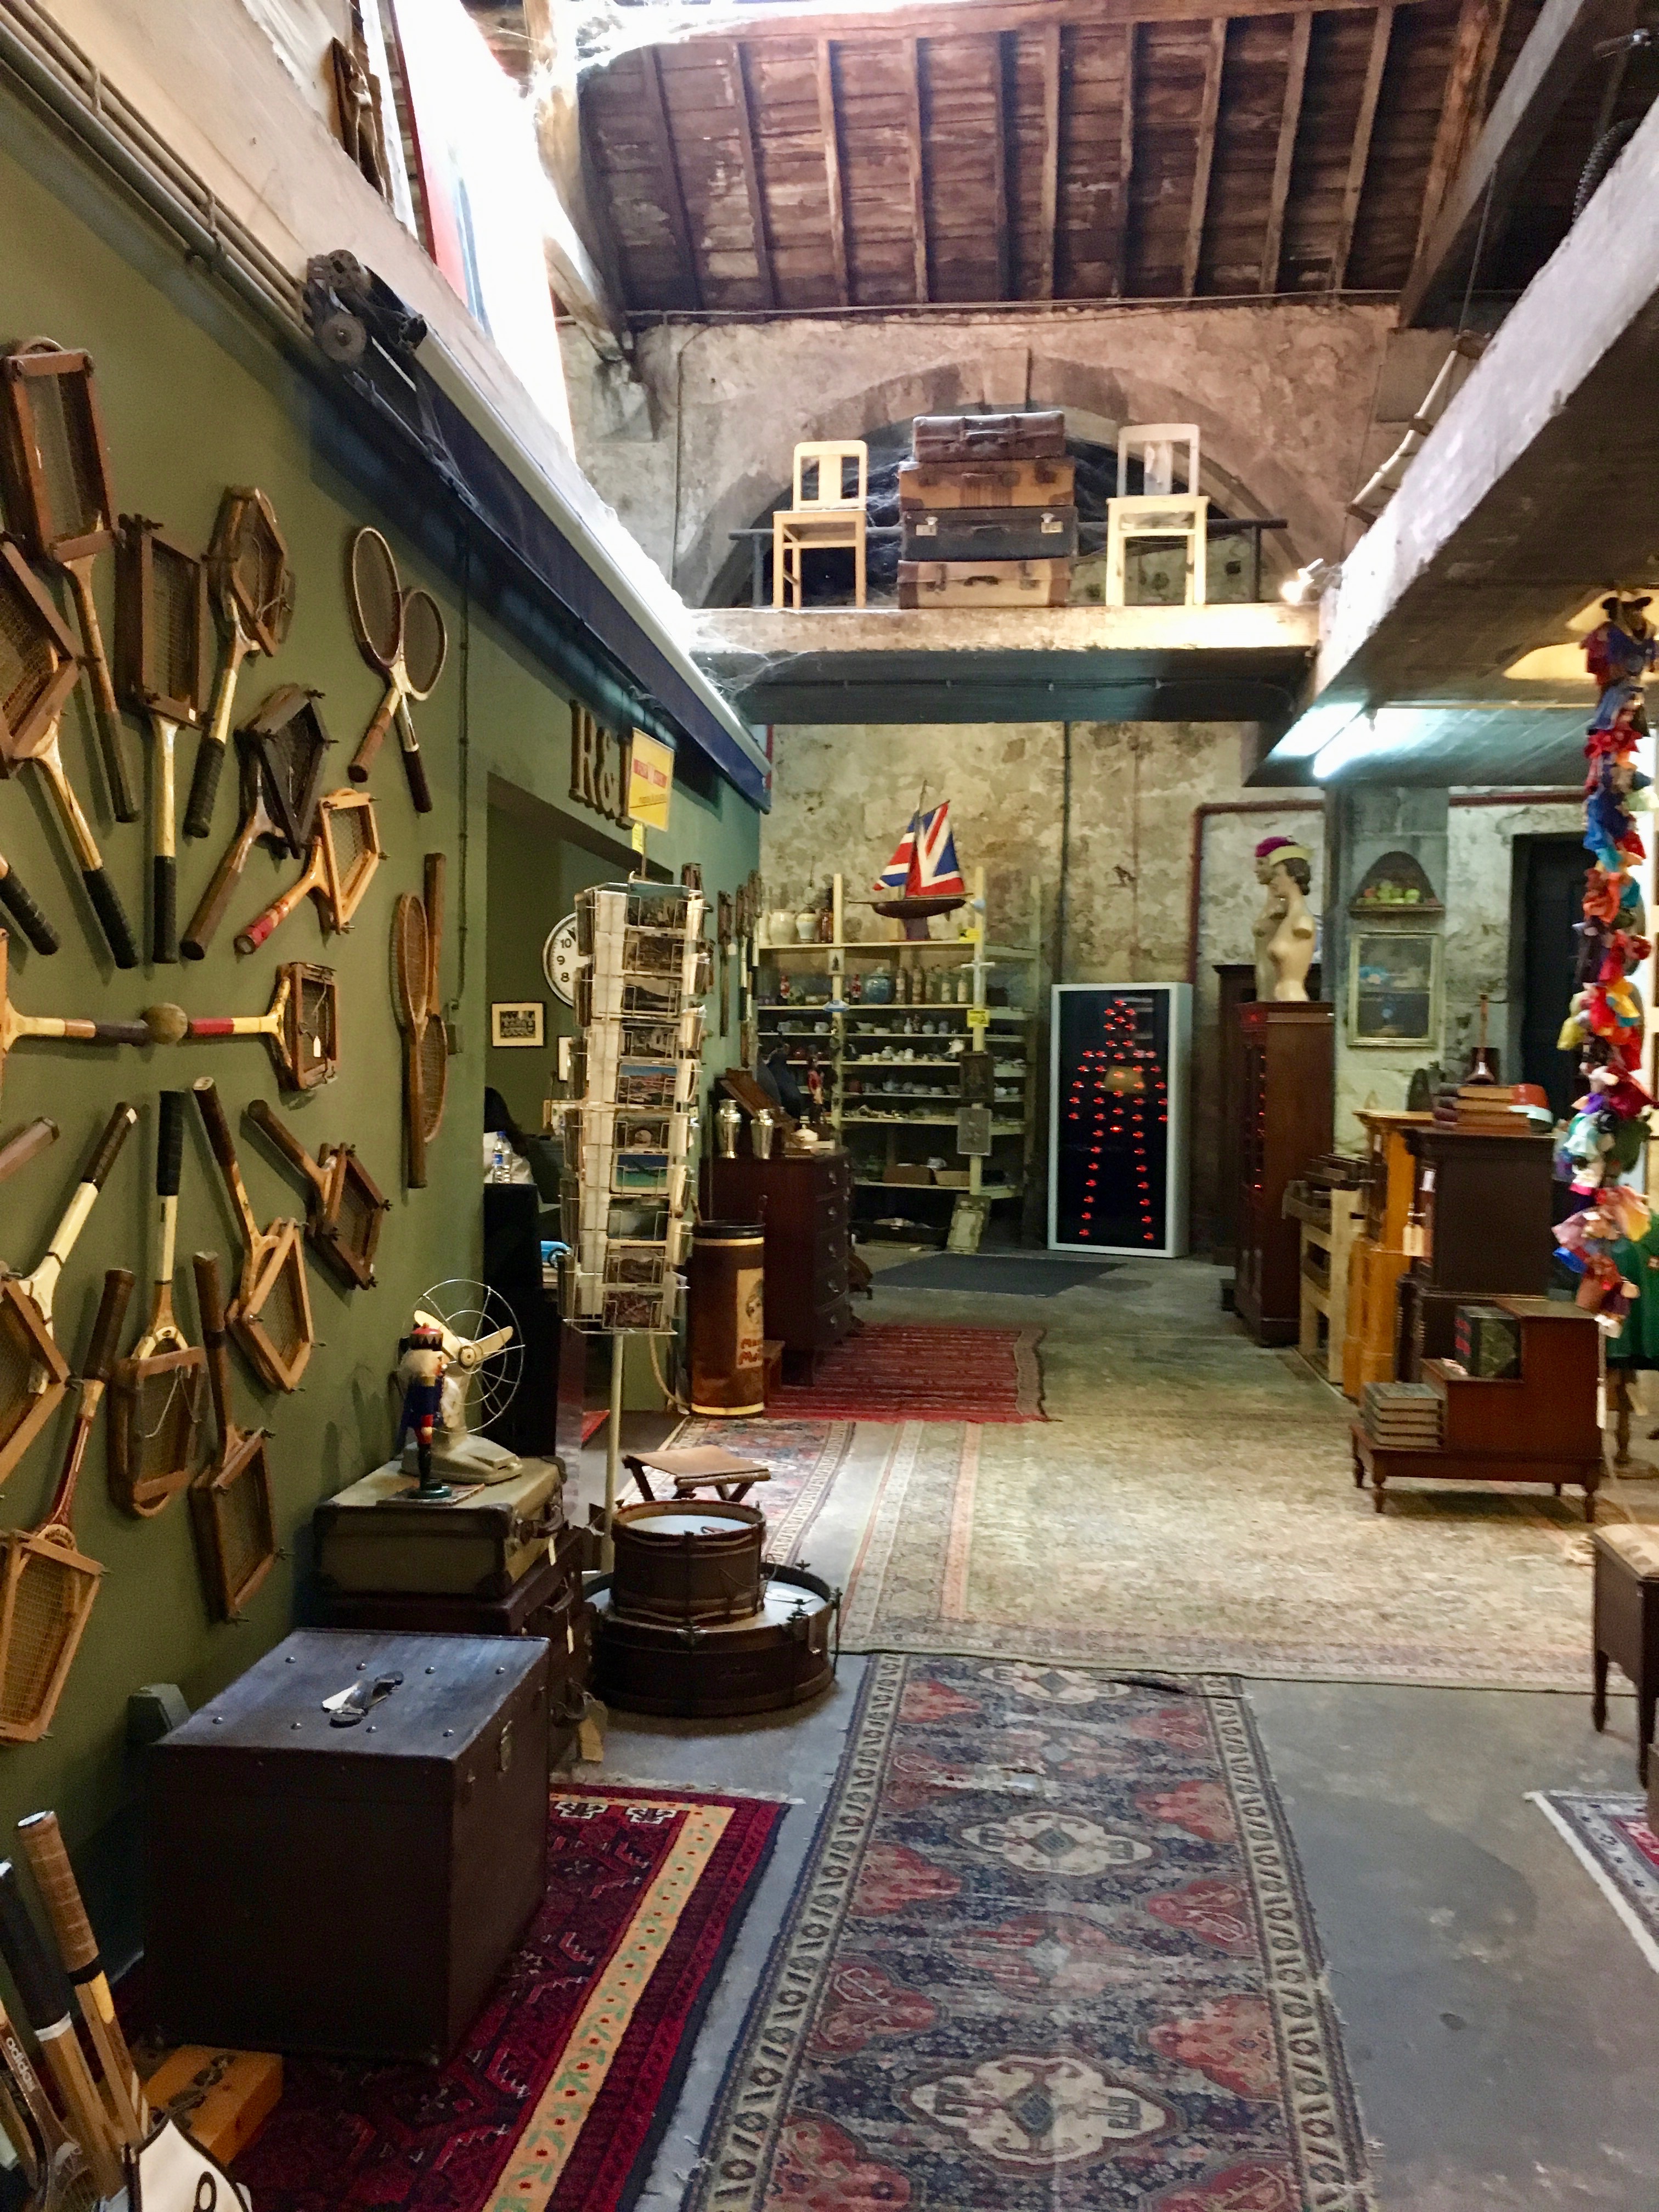 The interior of Armazém, with eclectic furniture in a warehouse-like setting